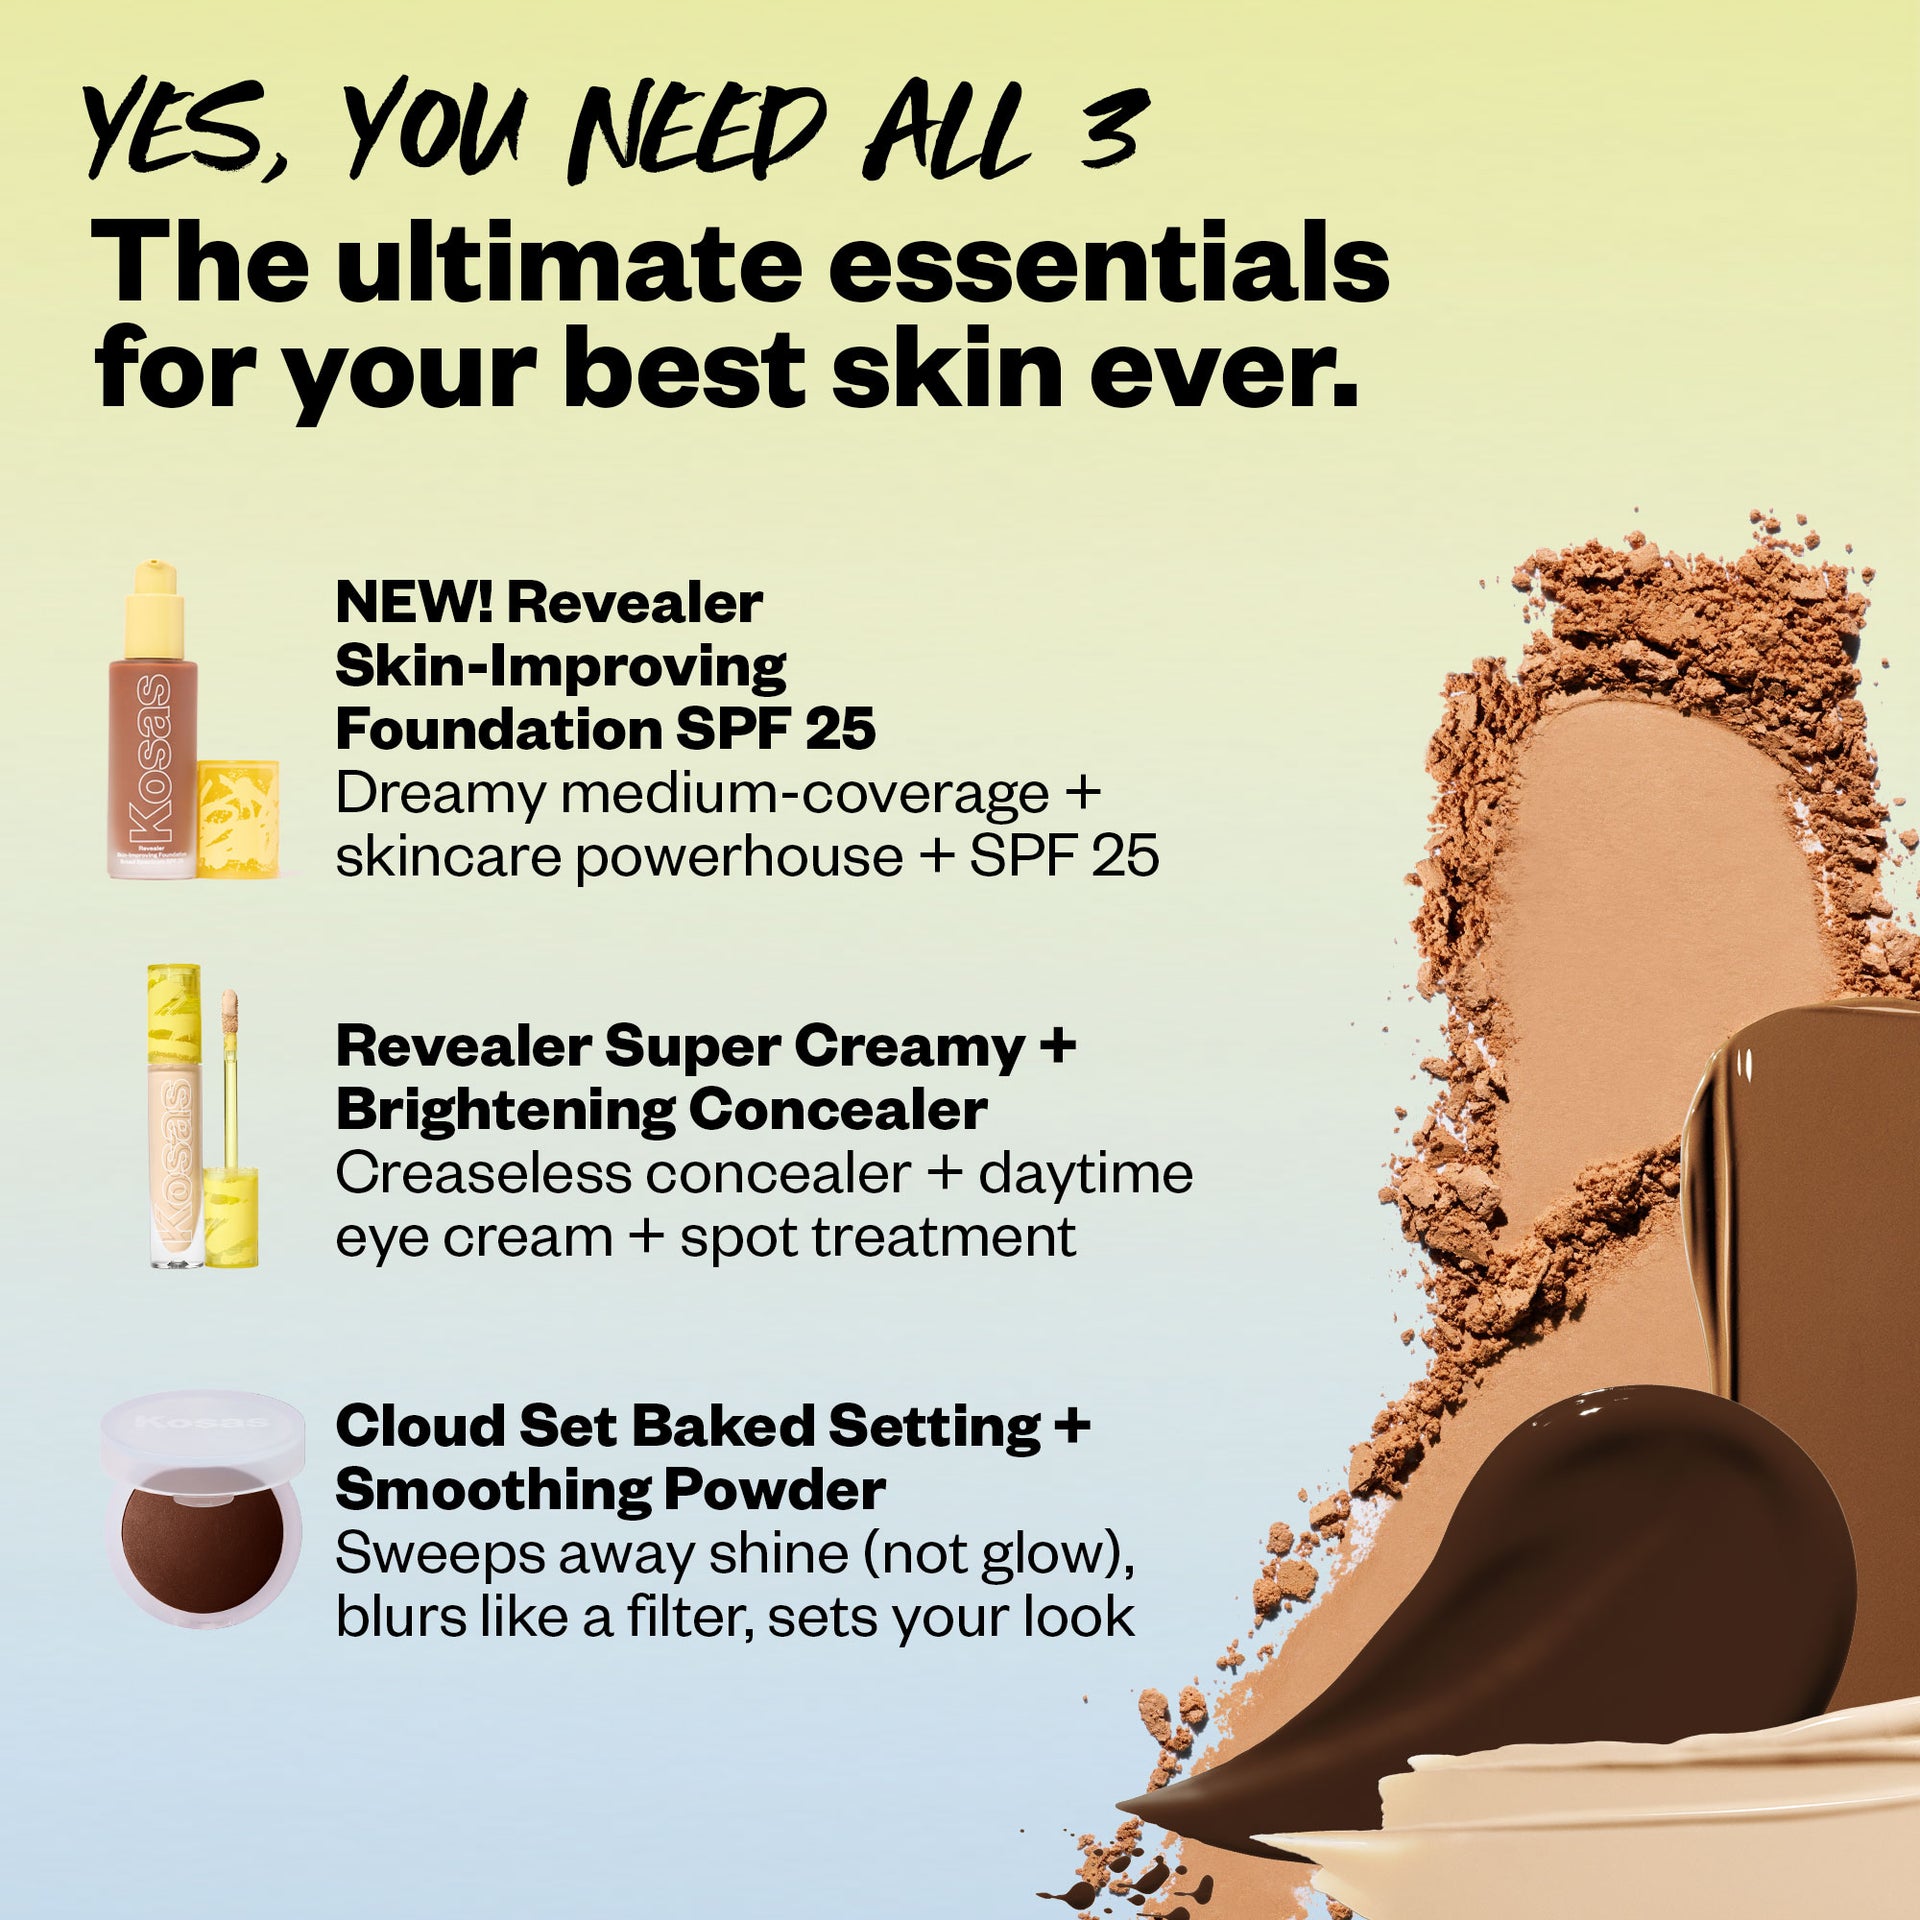 The Ultimate Essentials for Best Skin